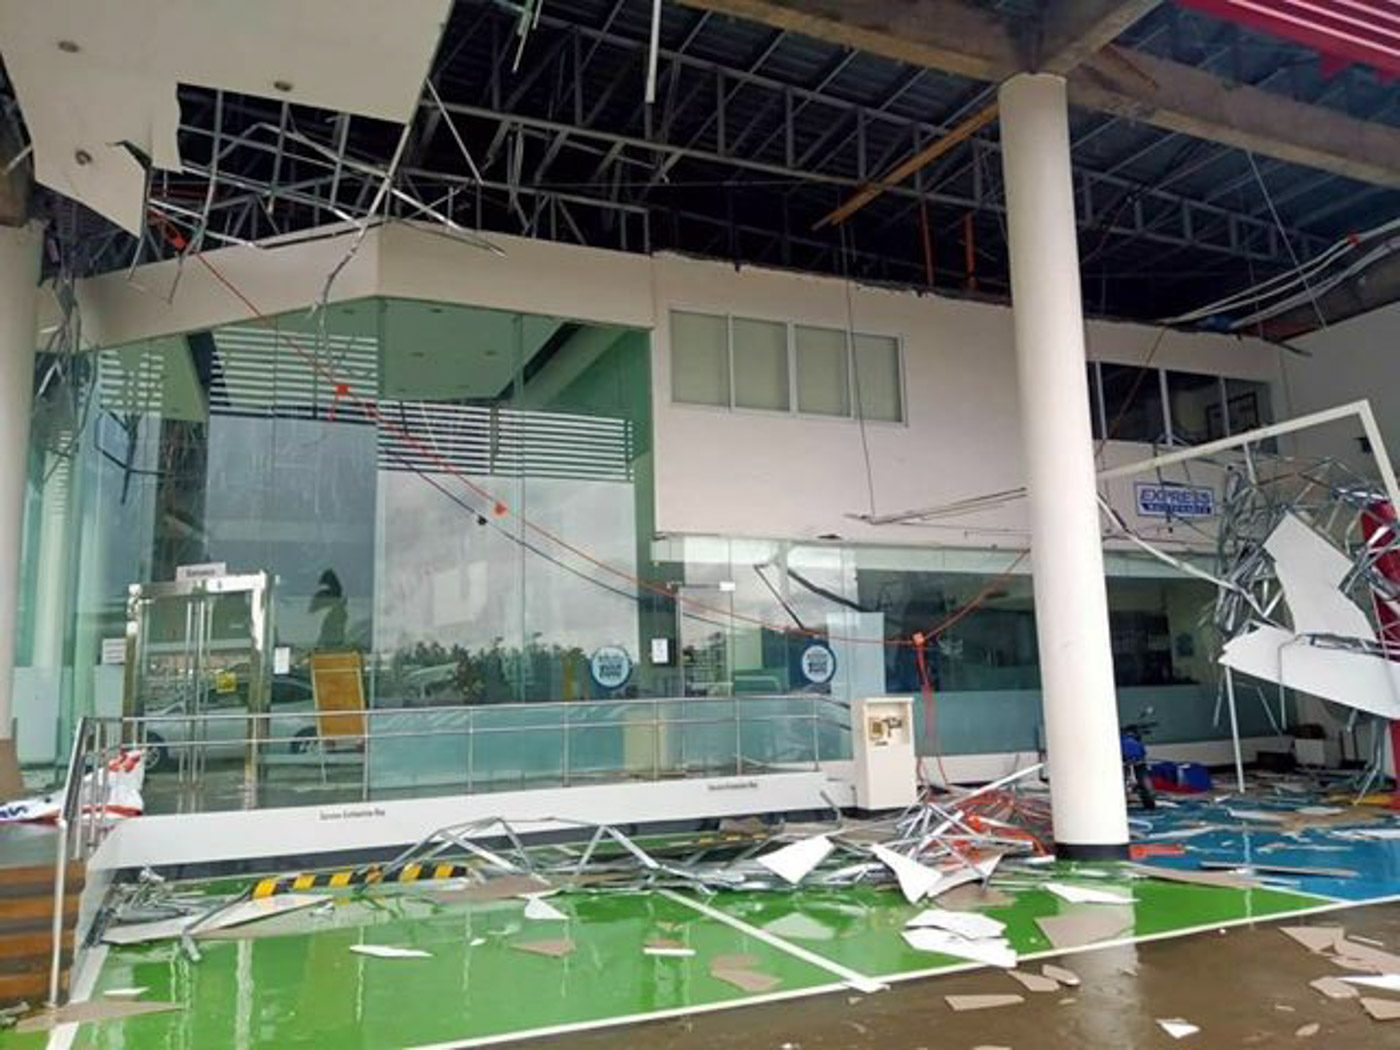 CAR SHOP. A Toyota branch in Roxas suffered from heavy damage due to Typhoon Ursula on Wednesday, December 25. #UrsulaPH. Photo courtesy of Erickson Guevarra 